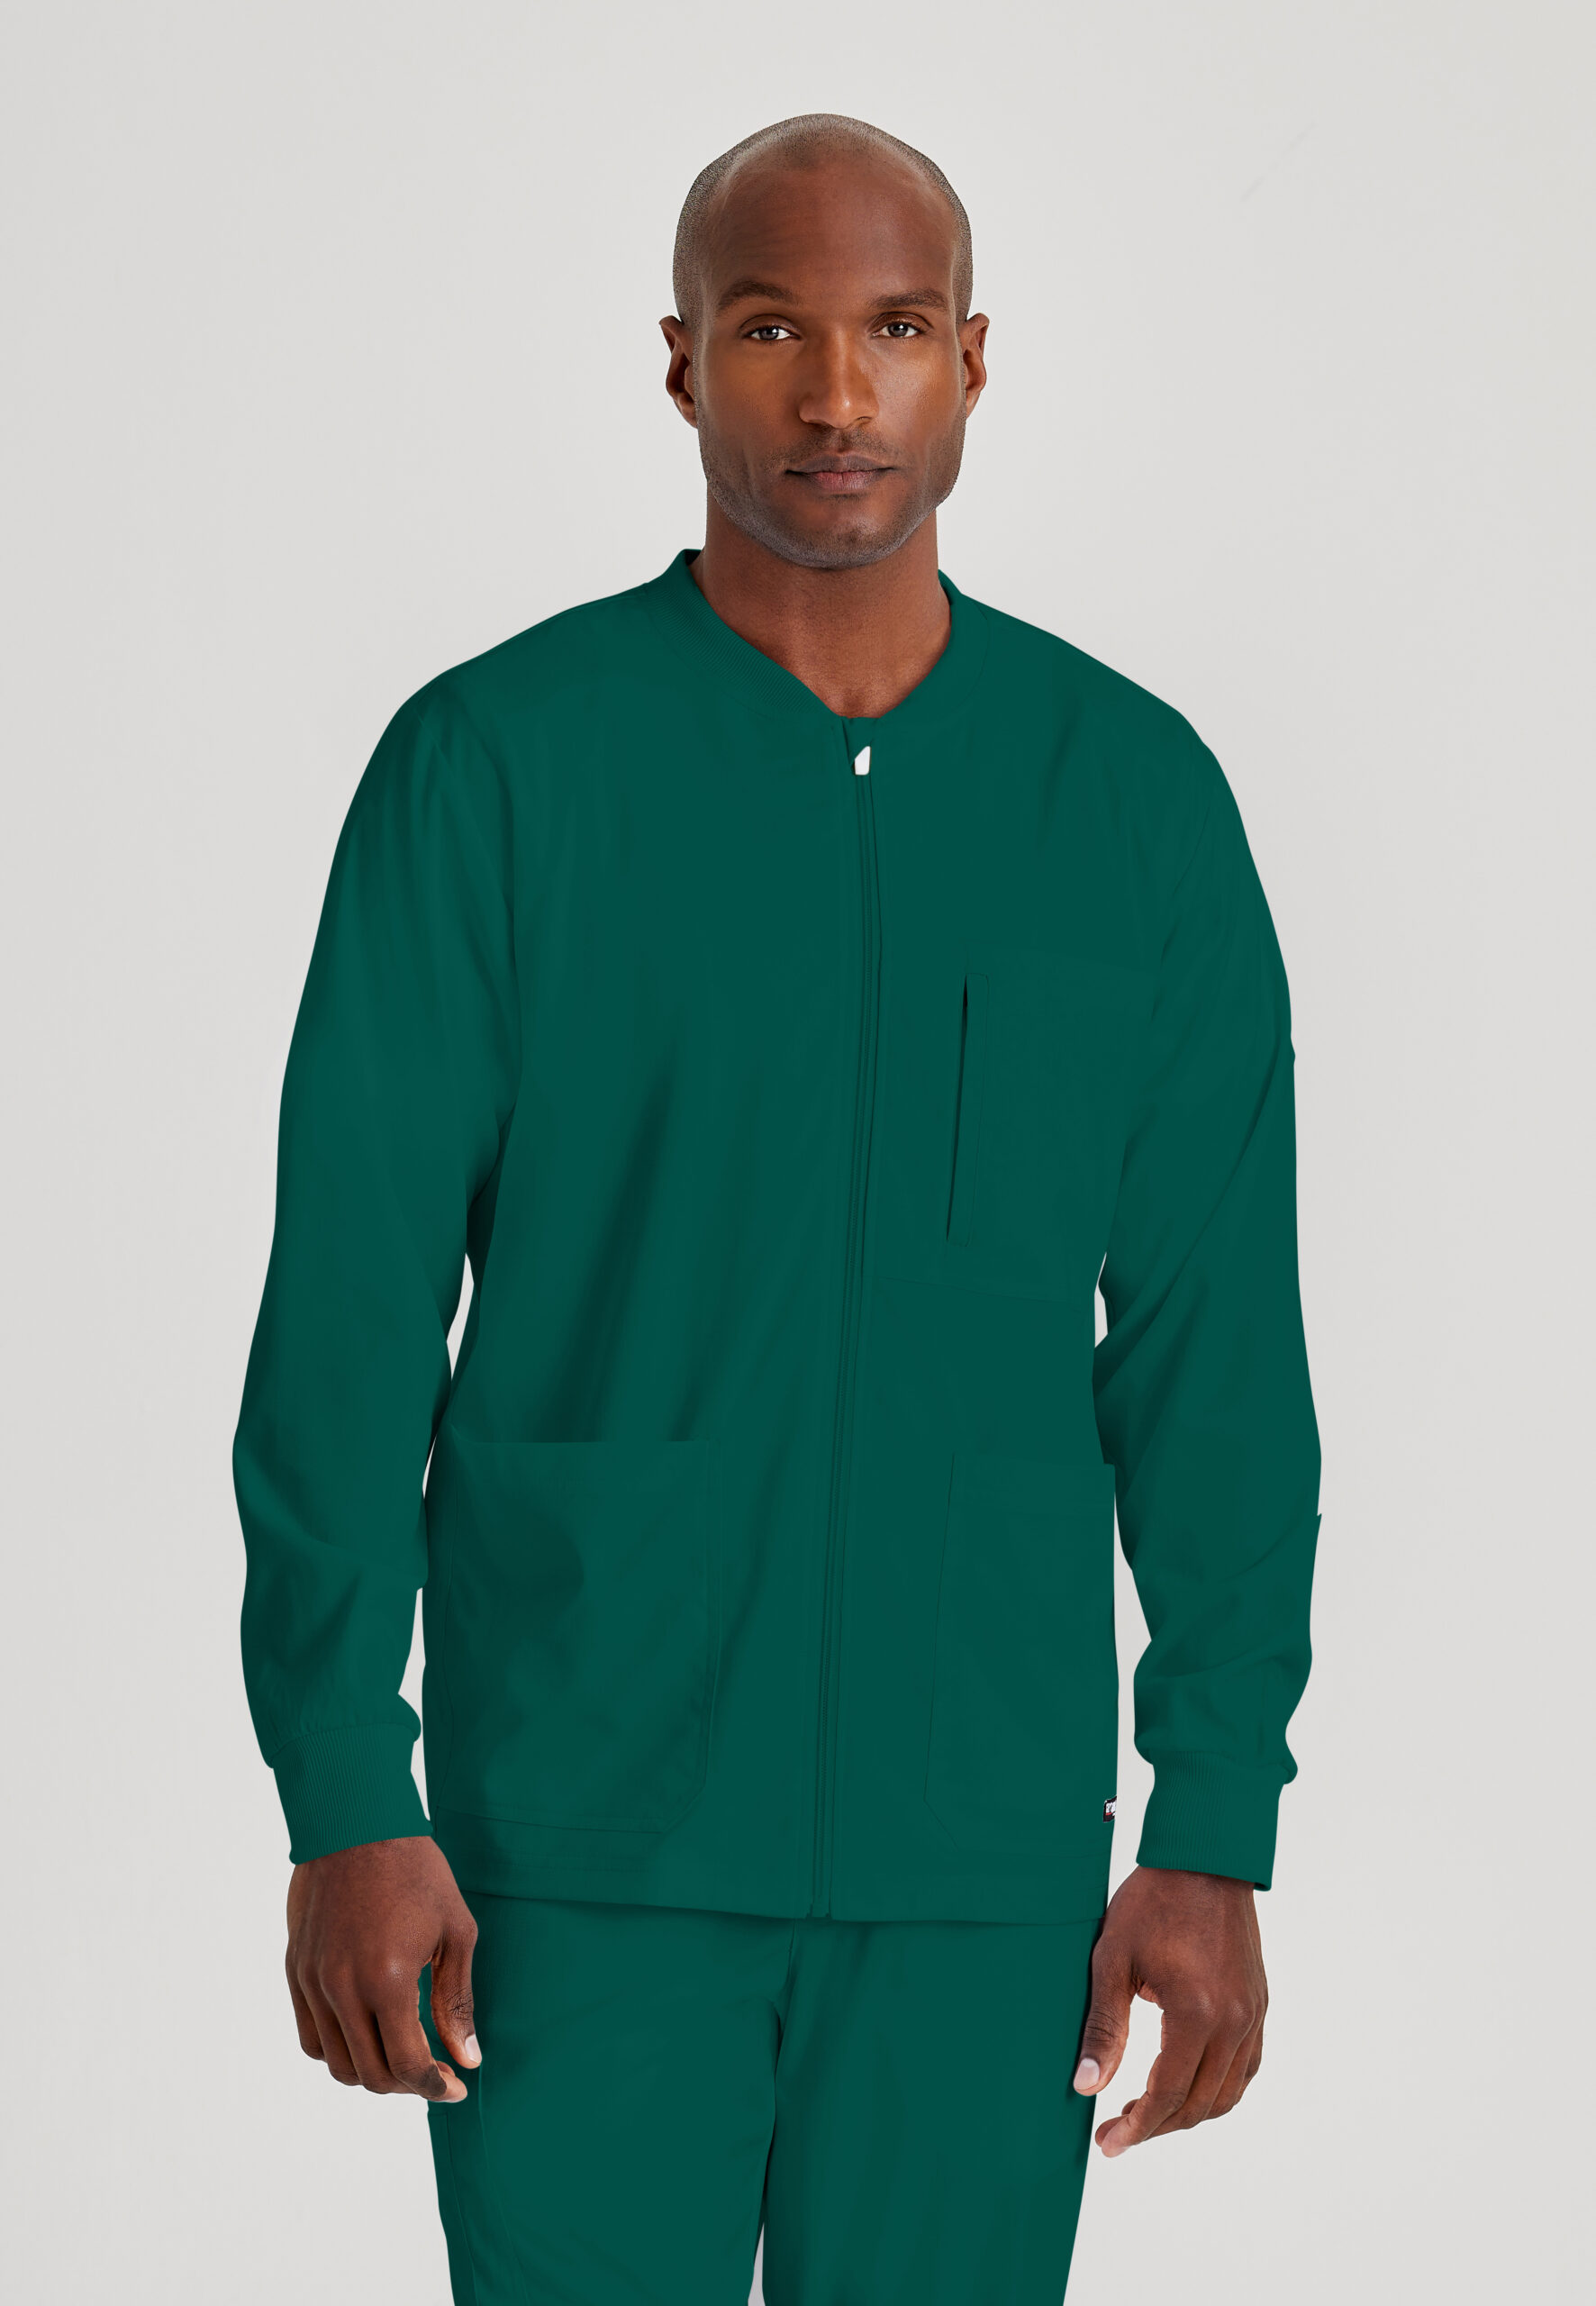 Men’s Antimicrobial Warm-Up Scrub Jacket in Hunter Green